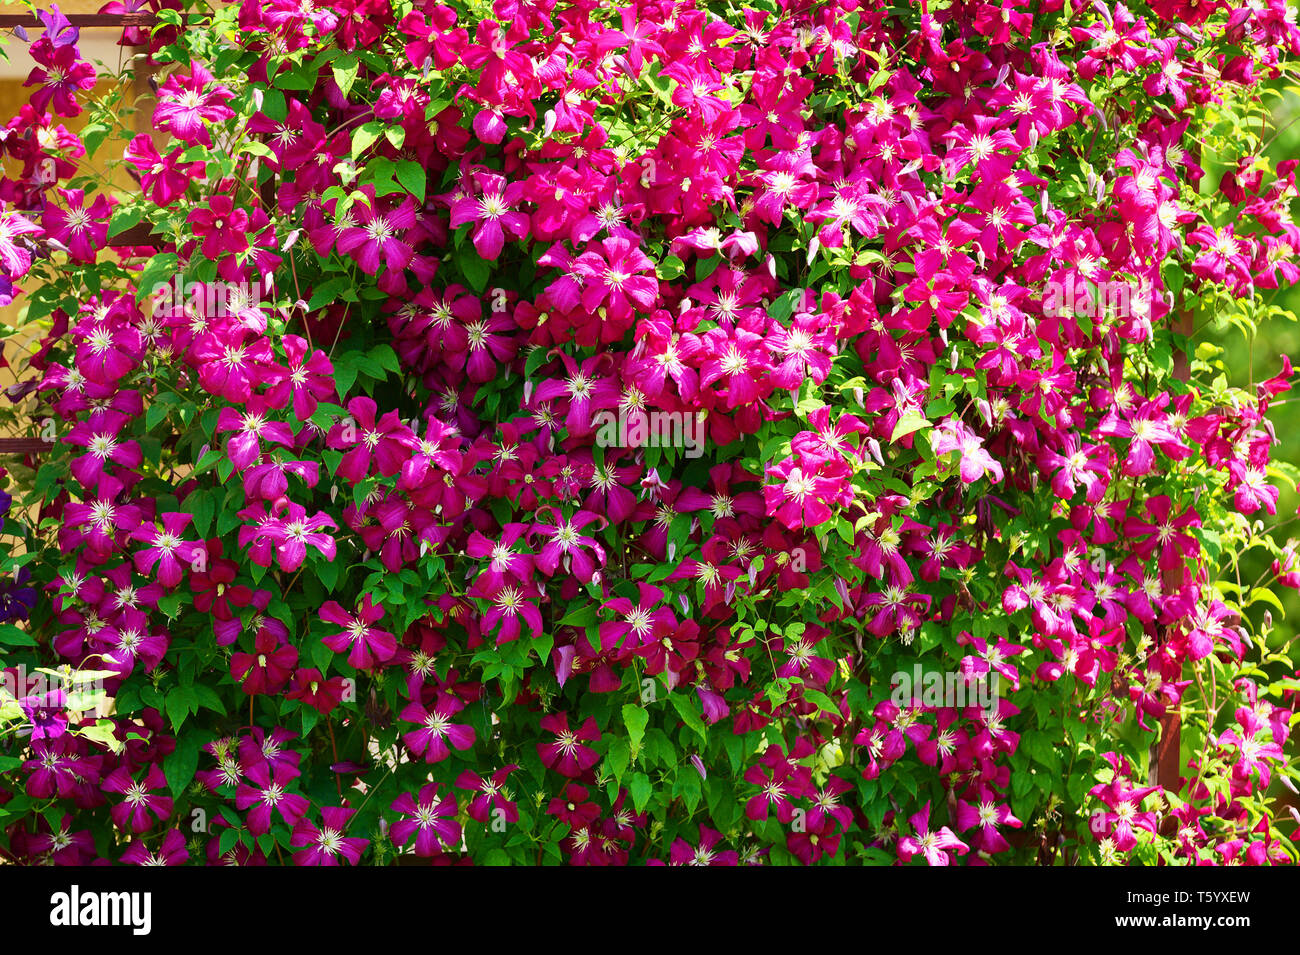 Pink clematis flowers blooming on shrub in sunlight. Spring garden in blossom. Stock Photo